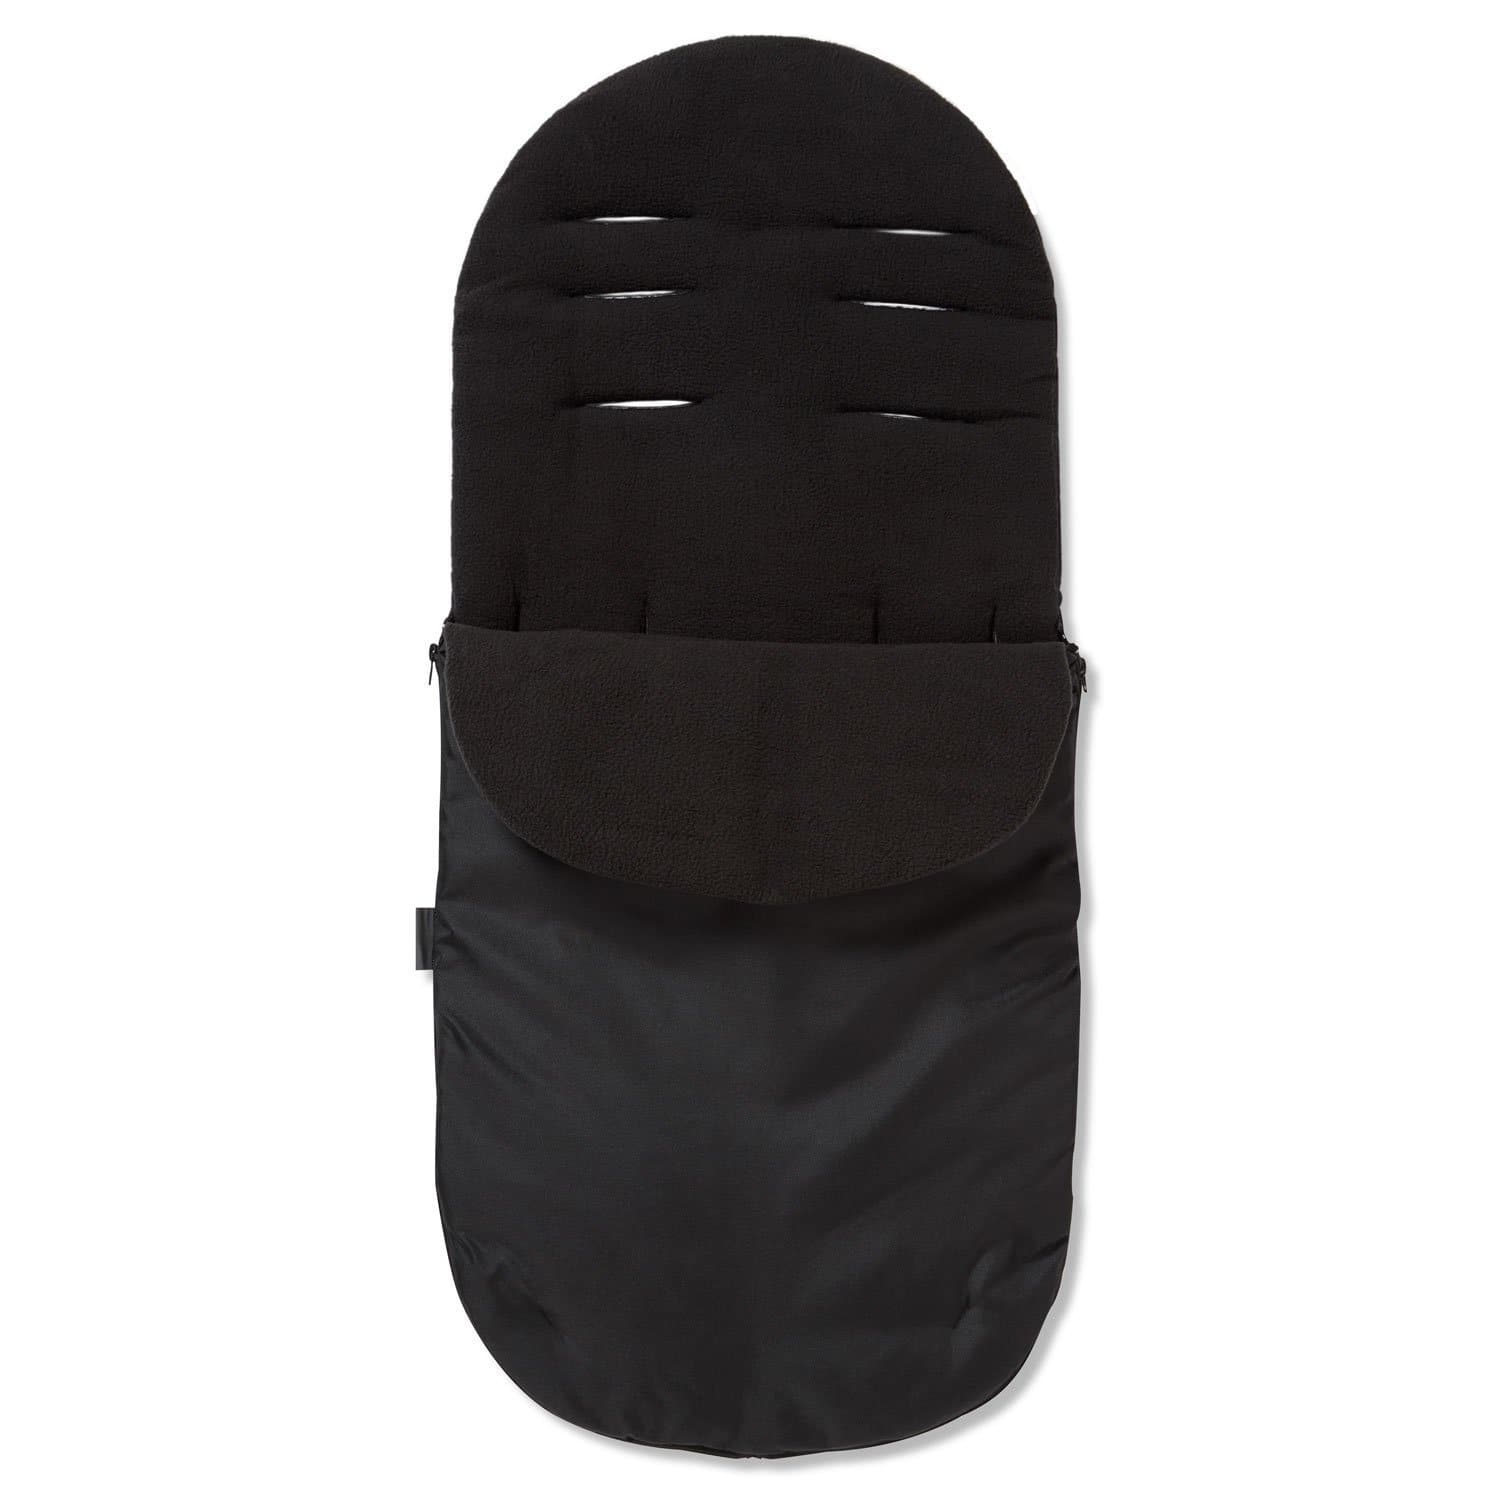 Footmuff / Cosy Toes Compatible with BabyDan - Black / Fits All Models | For Your Little One